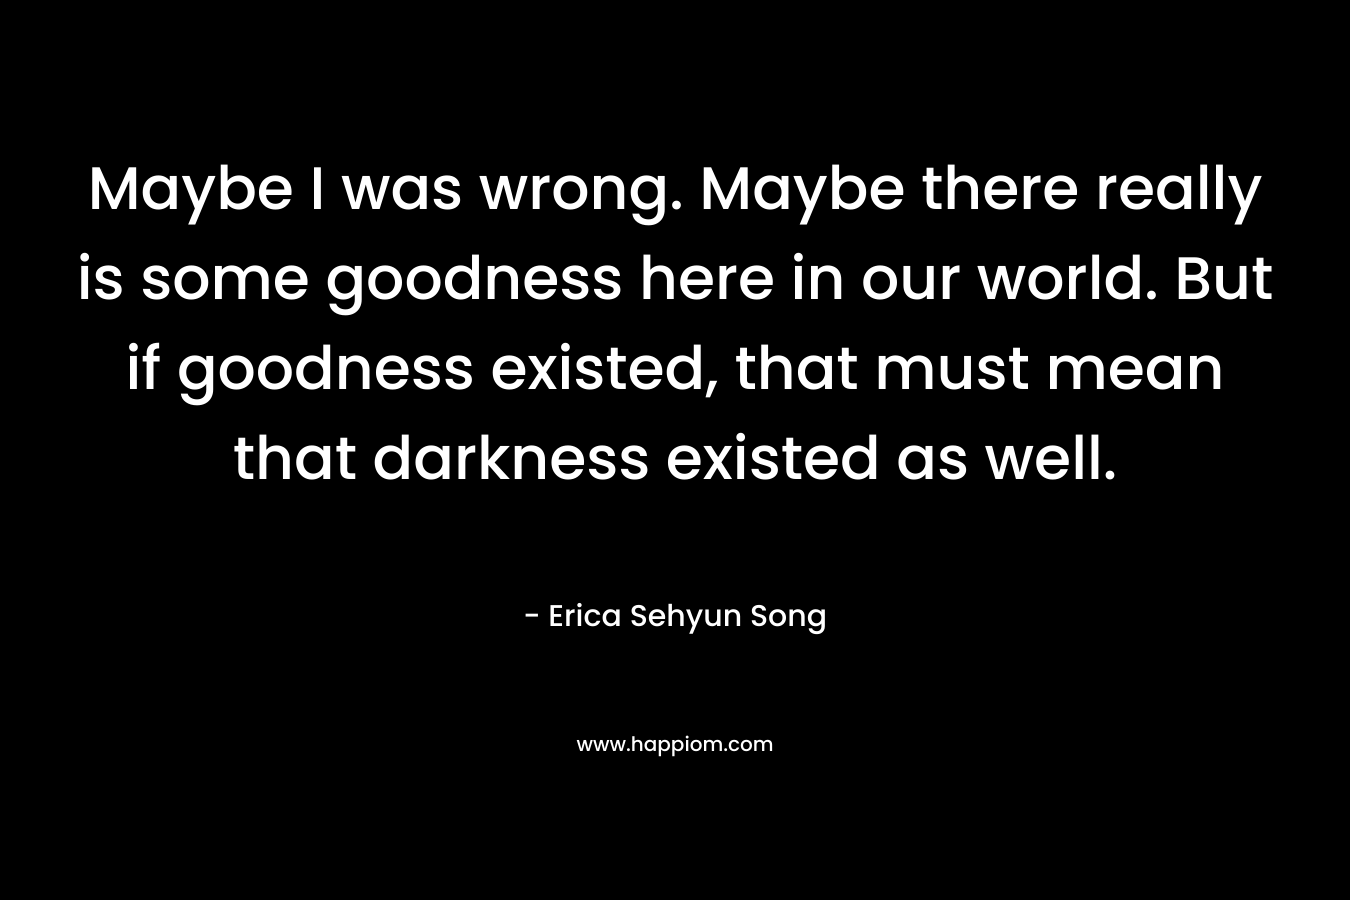 Maybe I was wrong. Maybe there really is some goodness here in our world. But if goodness existed, that must mean that darkness existed as well.